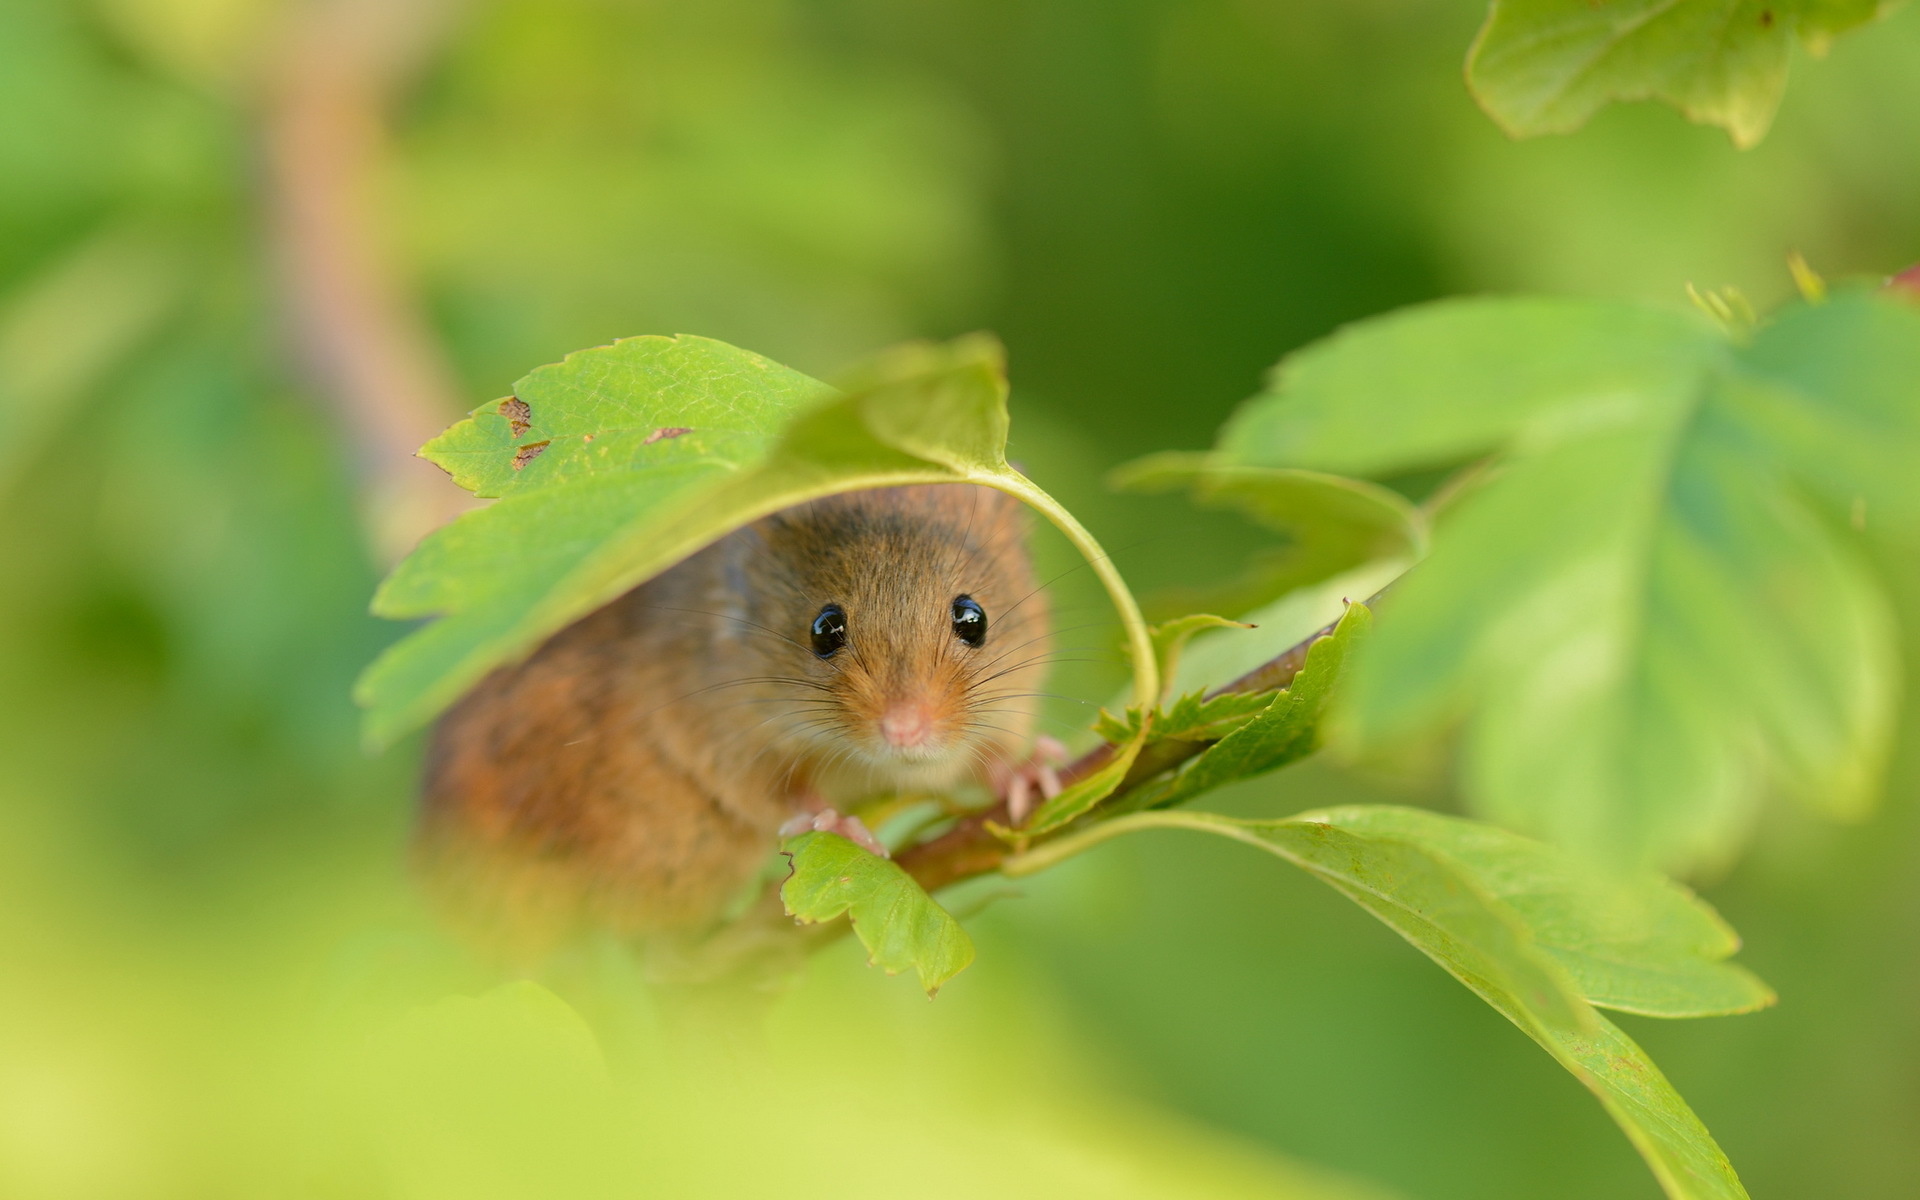 Variety of mouse wallpapers, Mouse in nature, Cute creature, Backgrounds, 1920x1200 HD Desktop